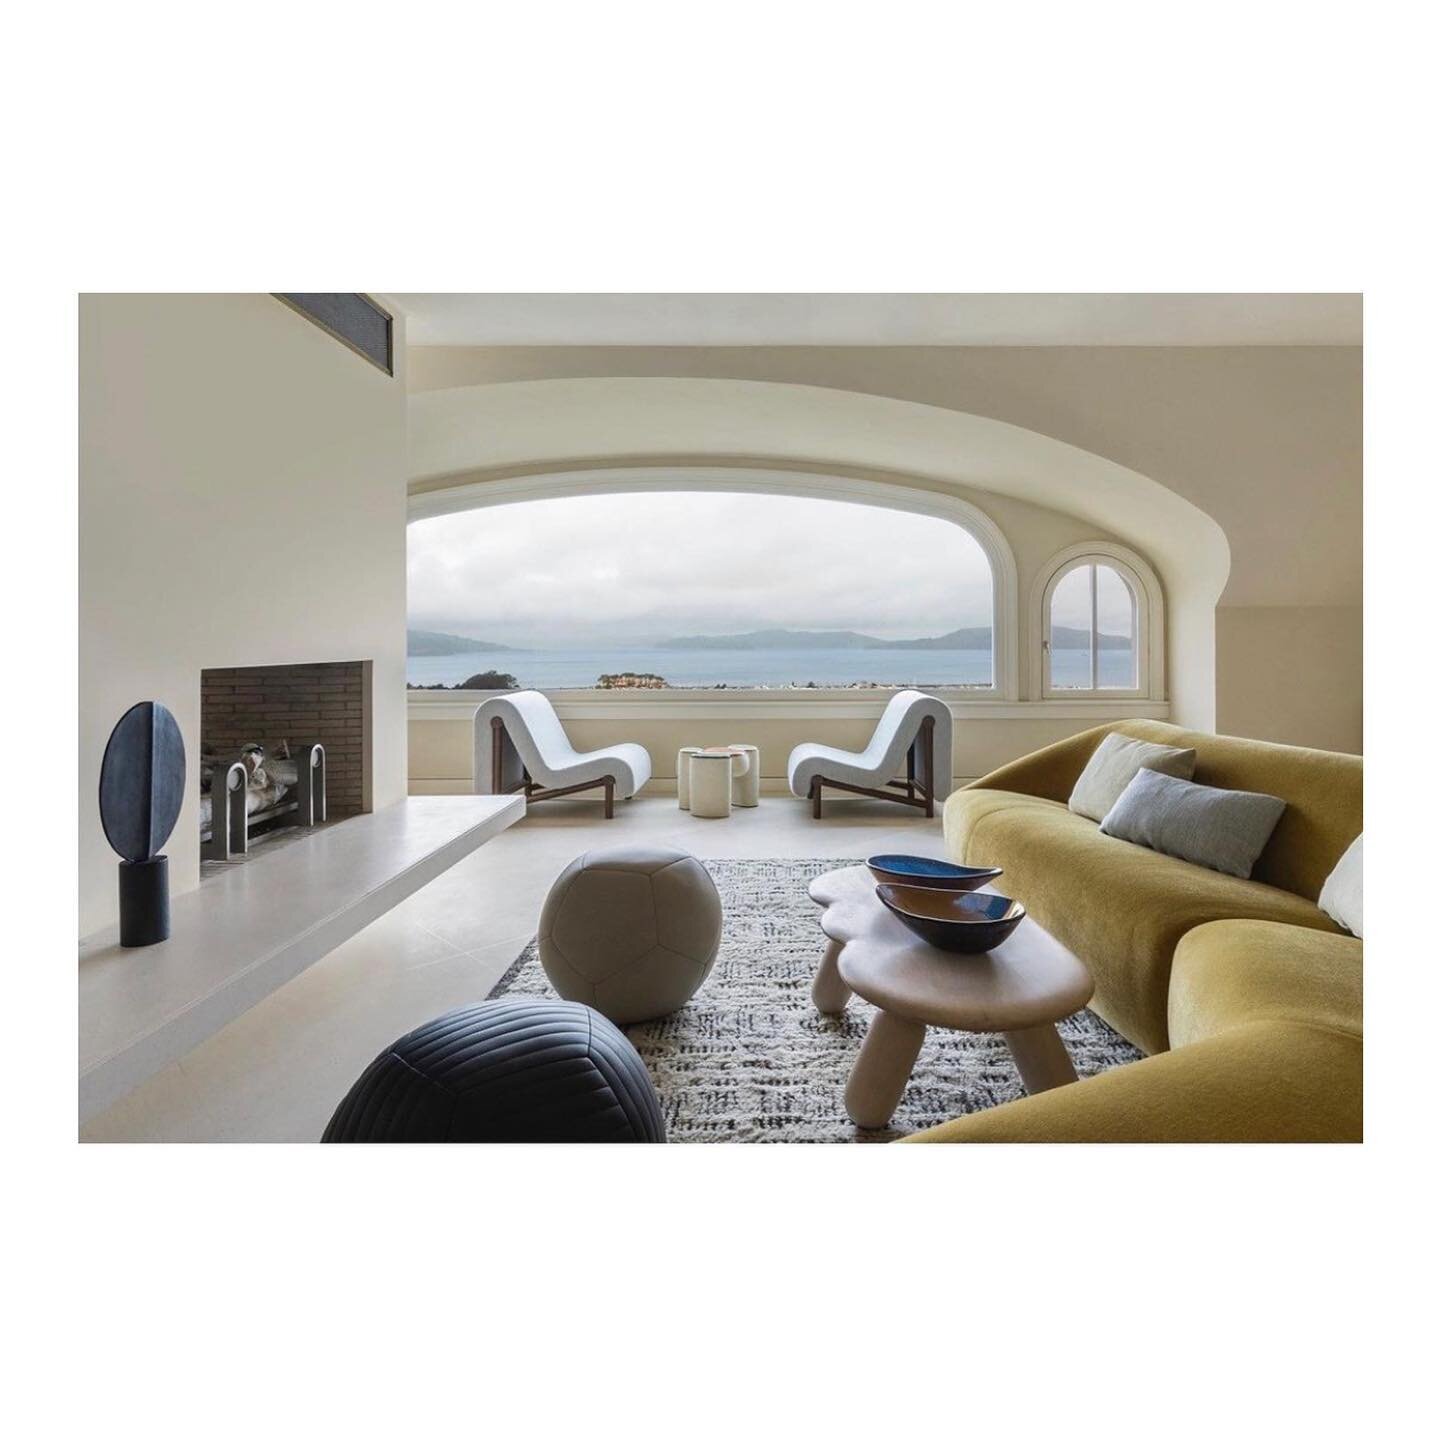 A ovation (with a view) for @heatherhilliarddesign for keeping living spaces playful in this outstanding project featuring our Ball Ottoman and Banded Ottoman in @galeriemagazine. 

Photo by @daviddlivingston 

#mosesnadel #heatherhilliarddesign #bal